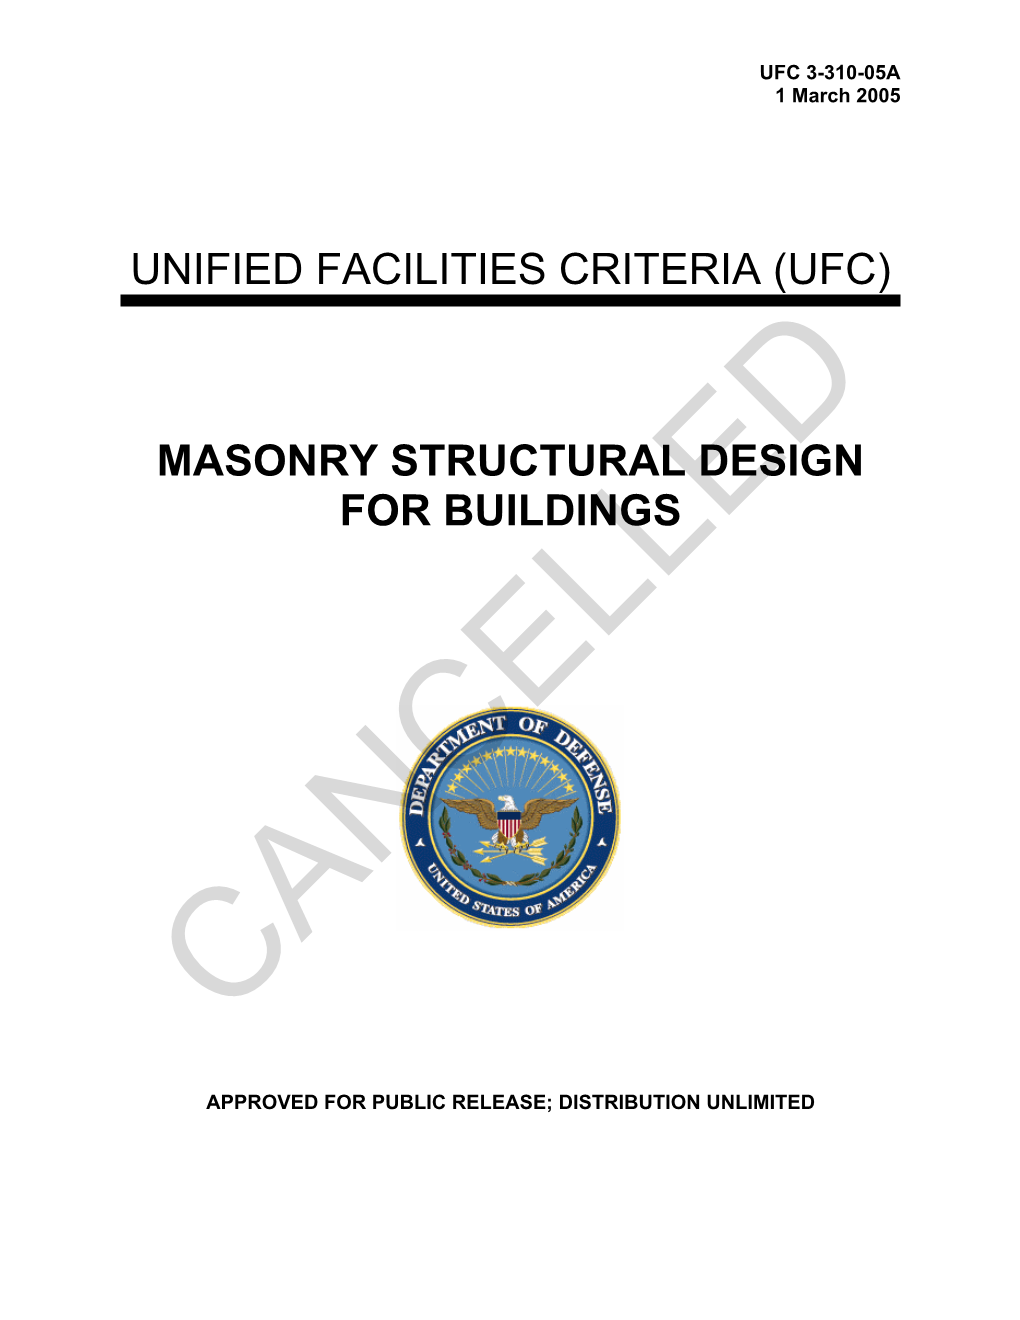 UFC 3-310-05A Masonry Structural Design for Buildings